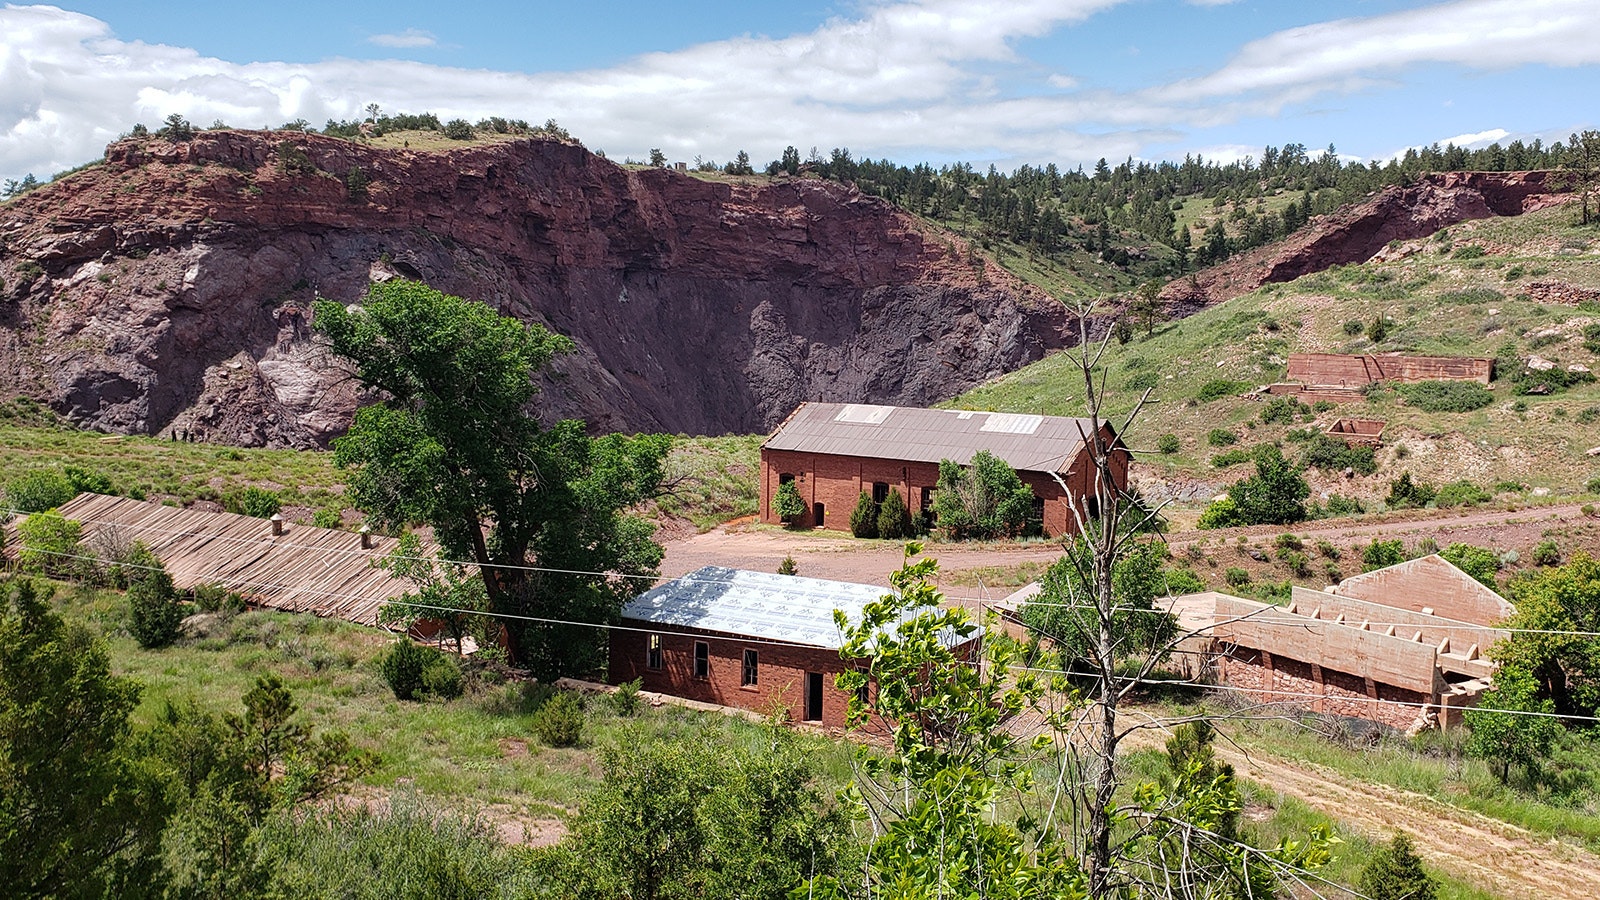 The old brick mining buildings near the Sunrise mine and historic site.